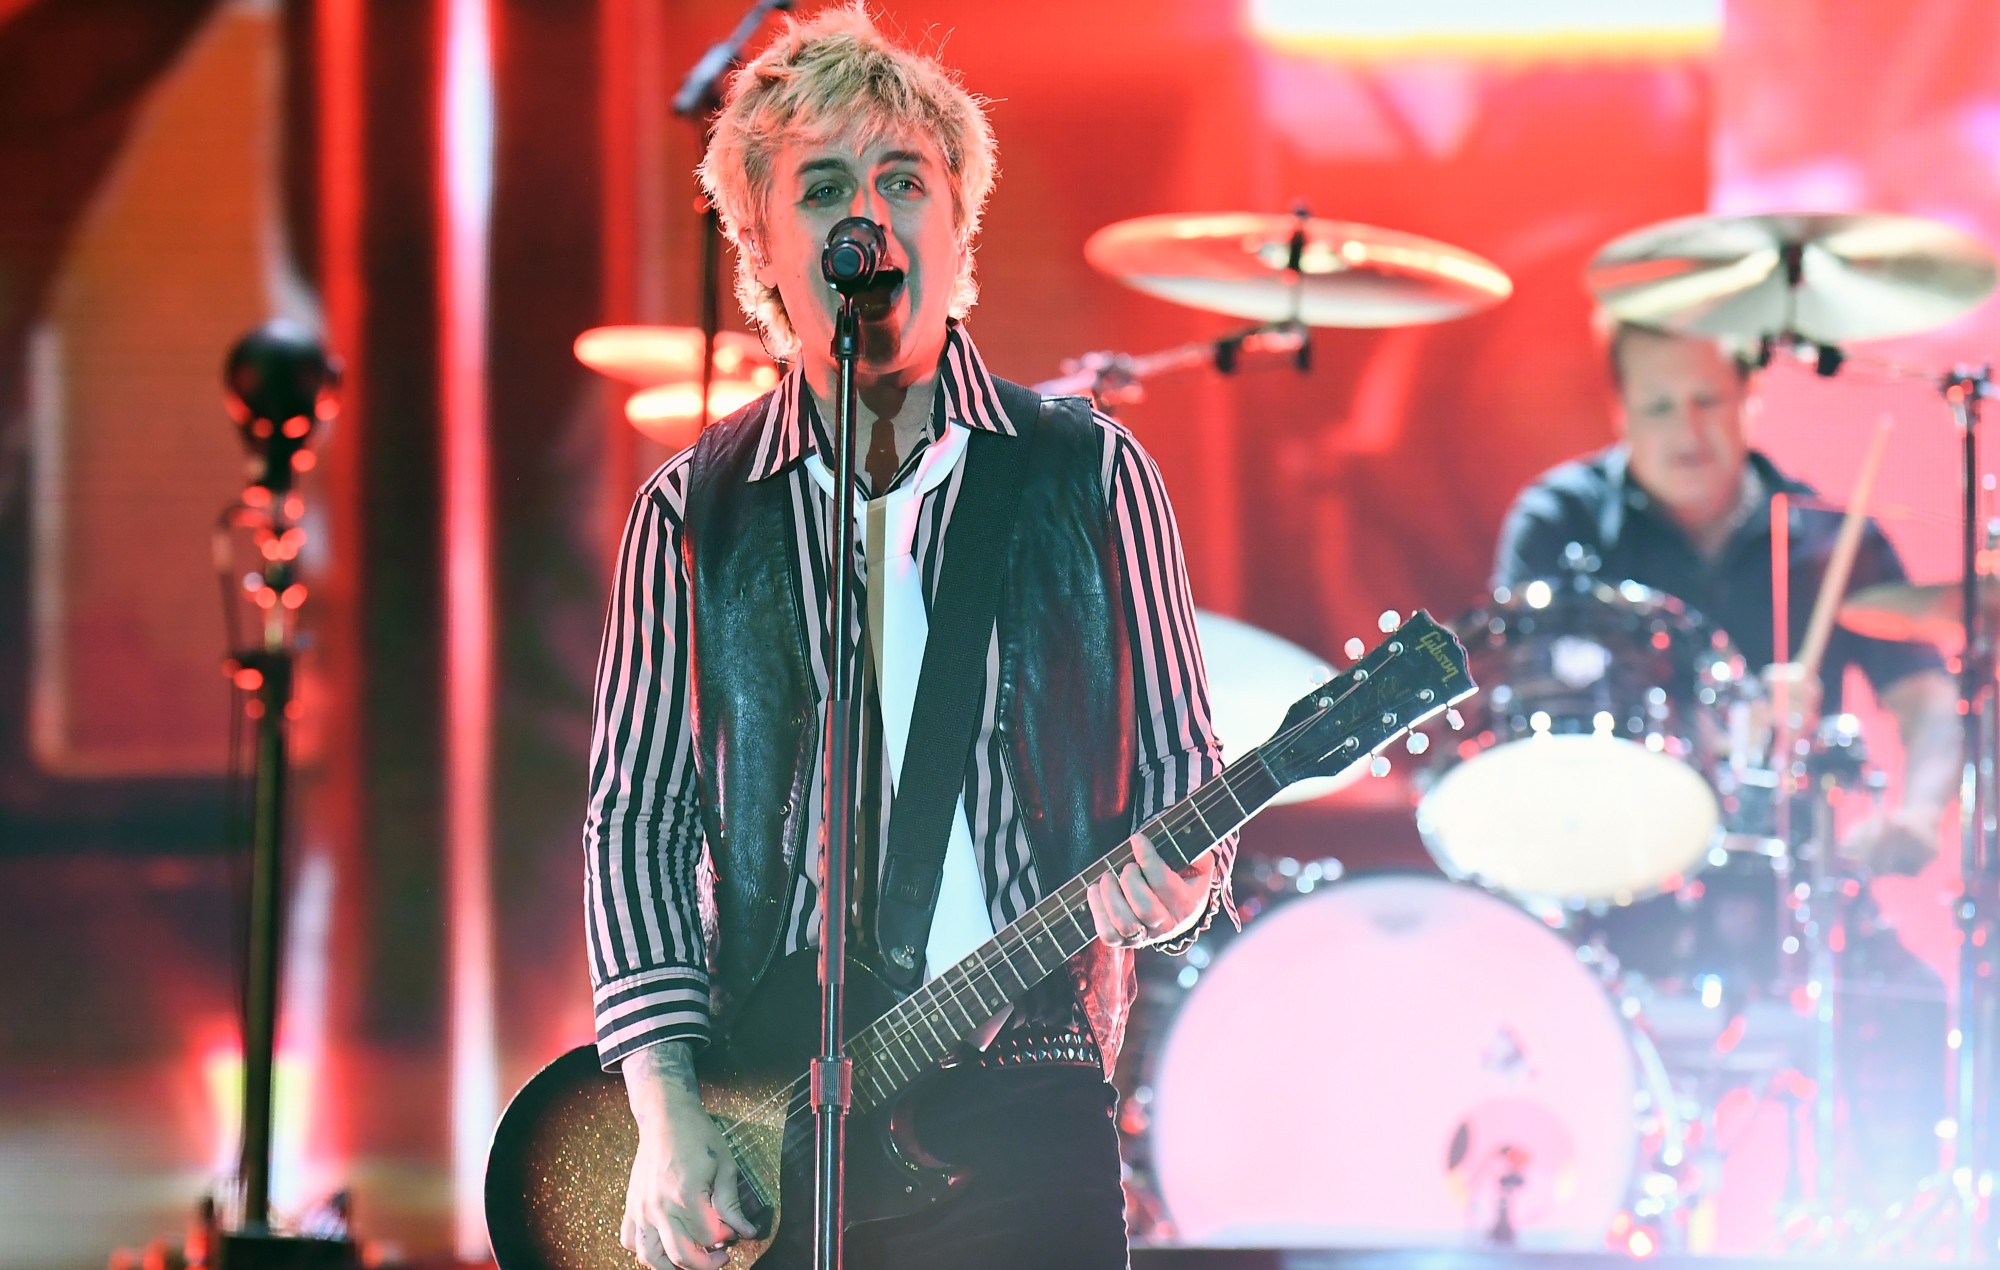 Watch Green Day play surprise intimate gig in London pub